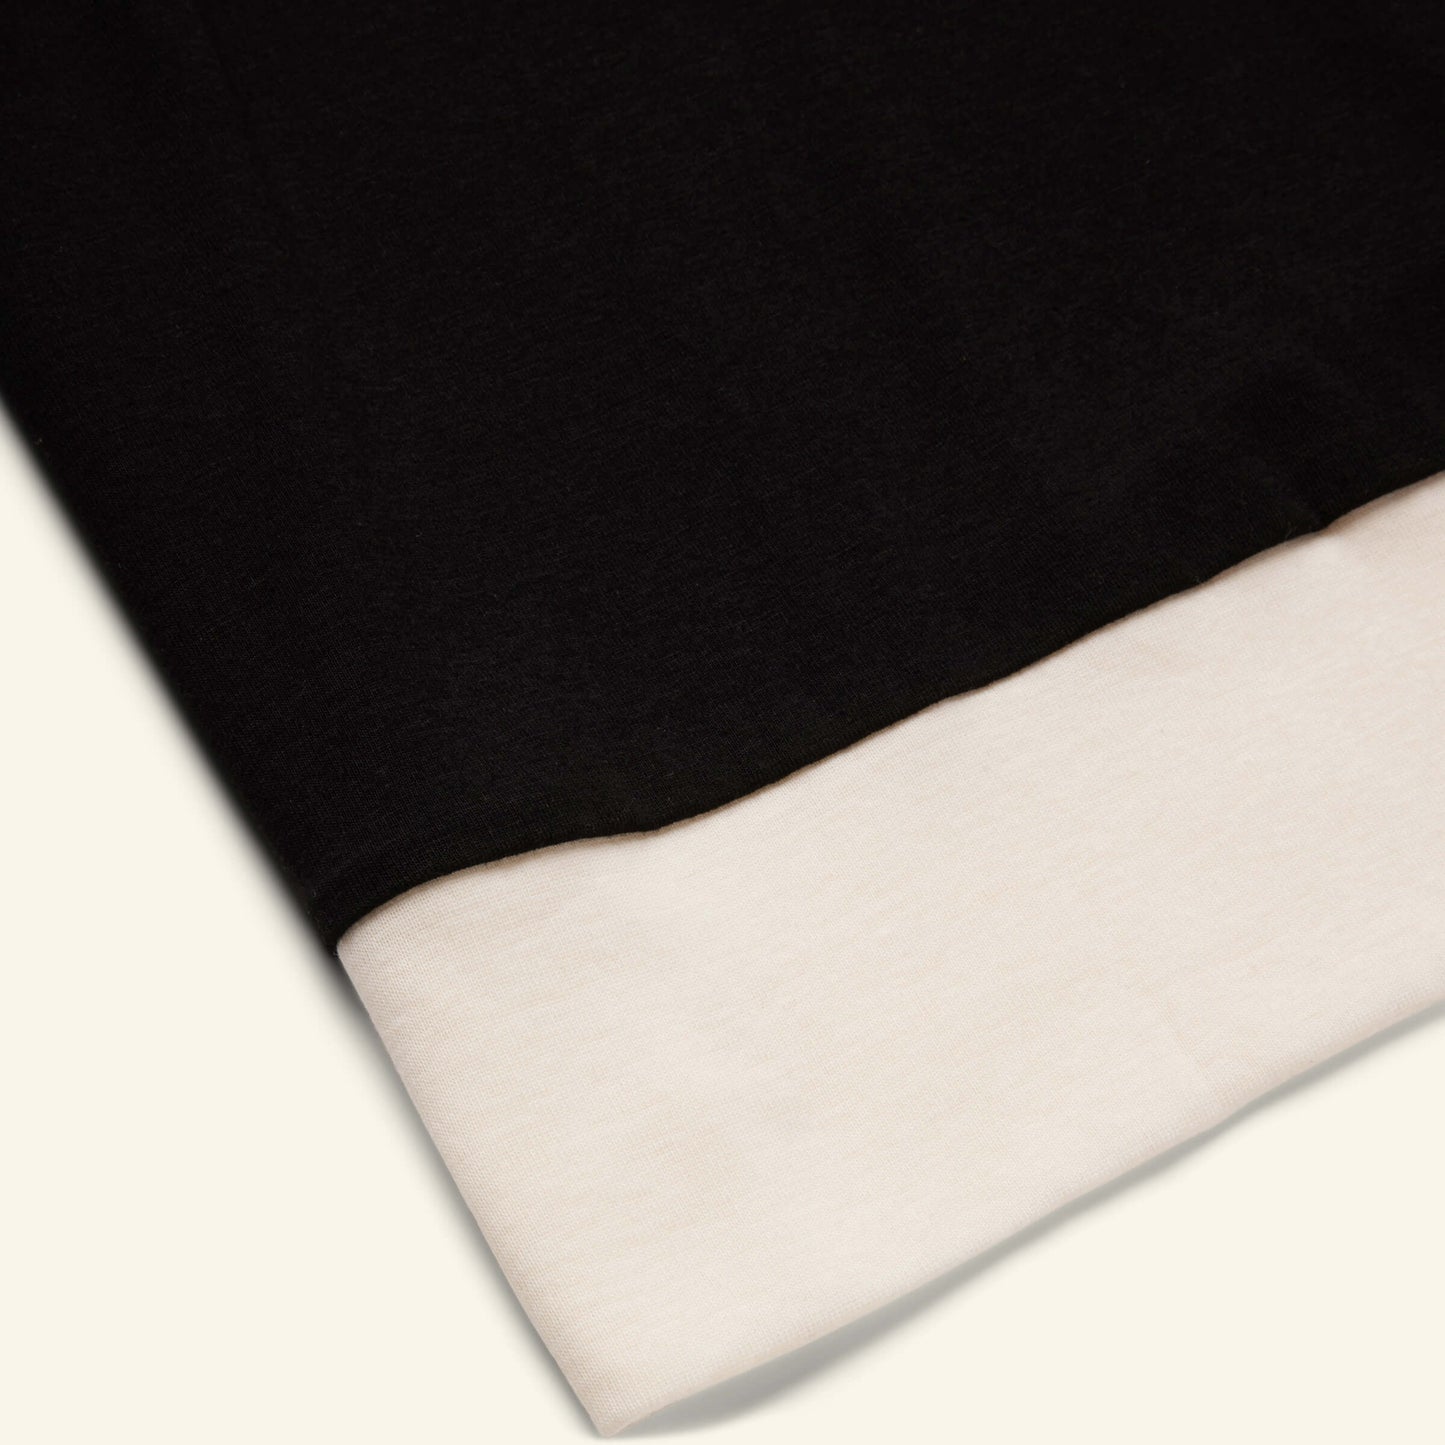 Detailed view of the Slumber Cloud Essential Raglan Long Sleeve made with Outlast temperature regulation technology